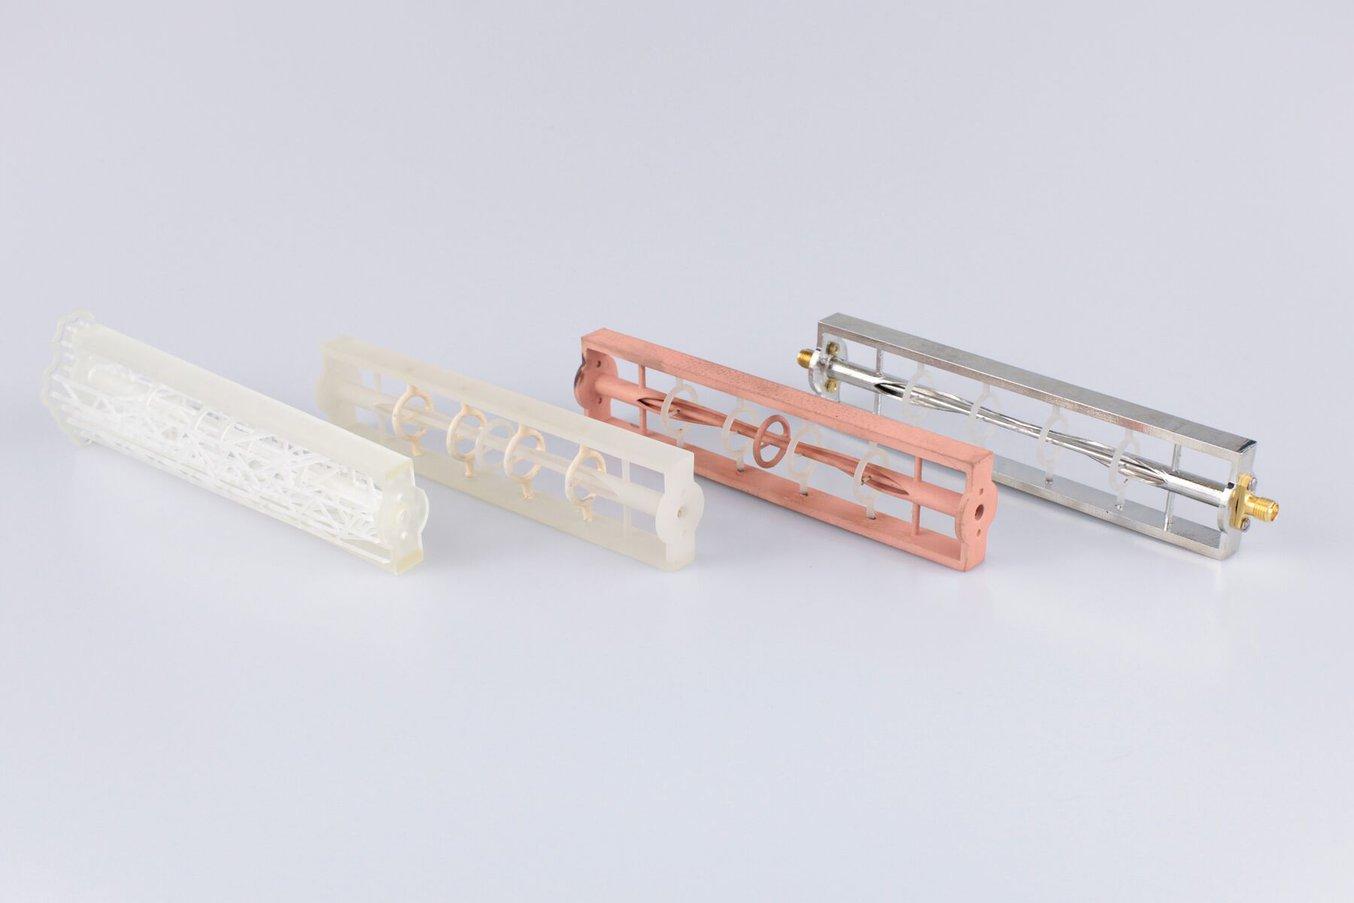 Four versions of the same design, laid out on a gray background. From left to right: 3D printed clear part on supports, 3D printed clear part with support material removed, part plated in copper, and part plated in tin.